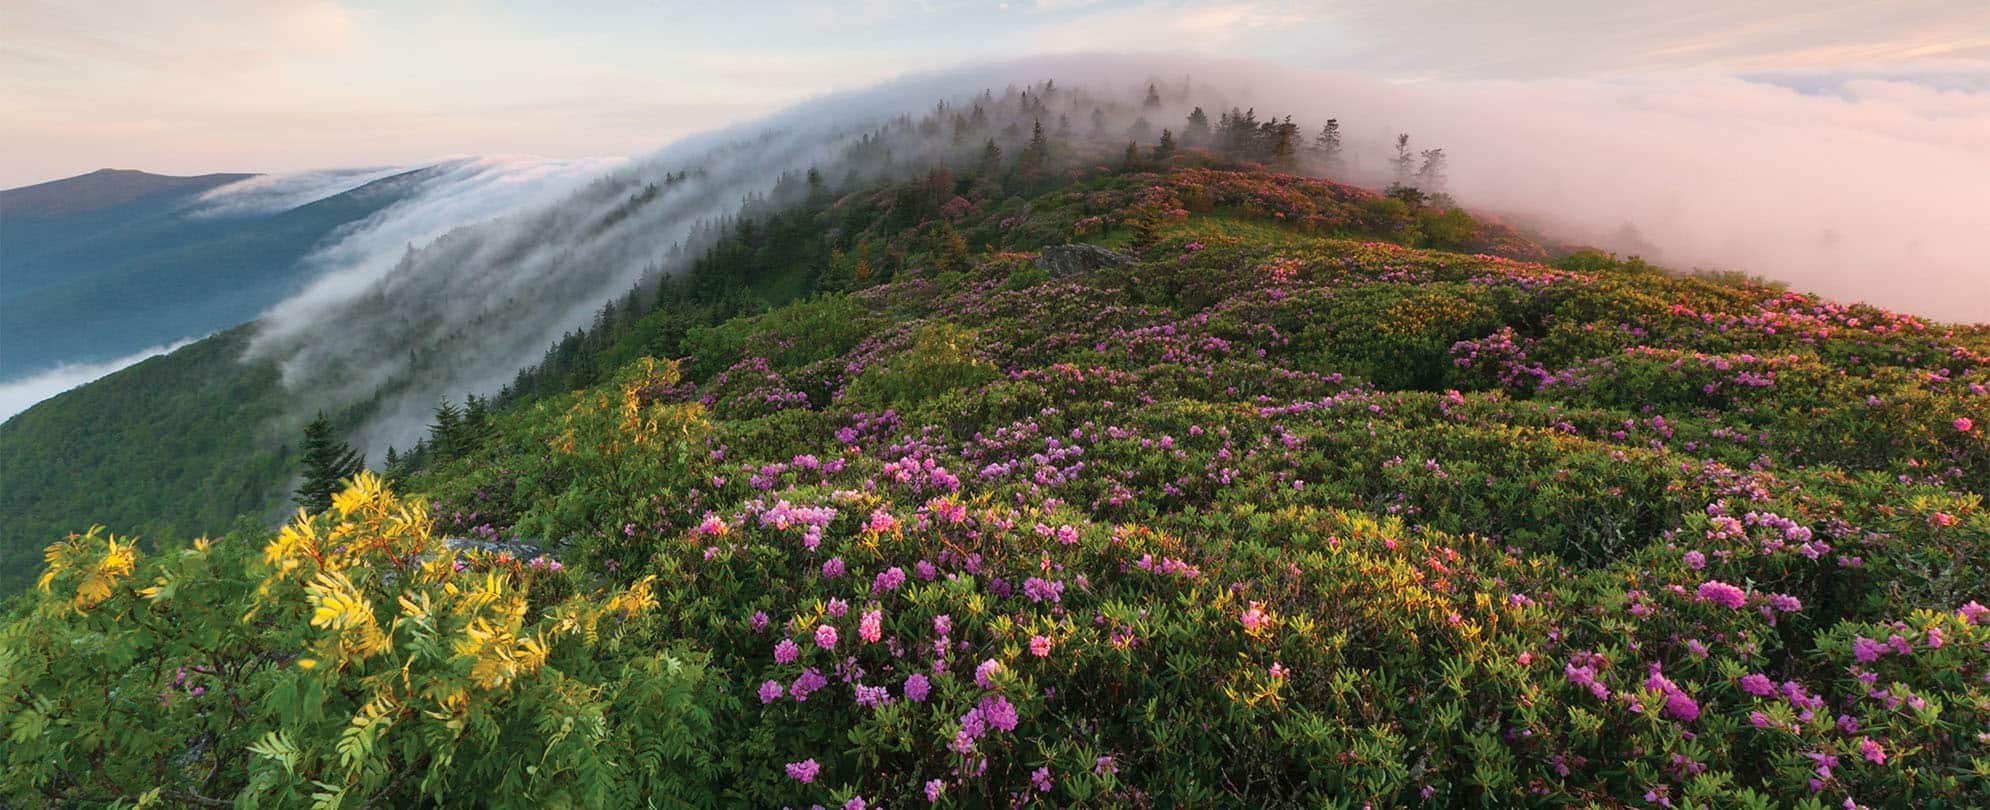 The top of the Great Smoky Mountains in Tennesse covered in colorful wildflowers and a light blanket of clouds